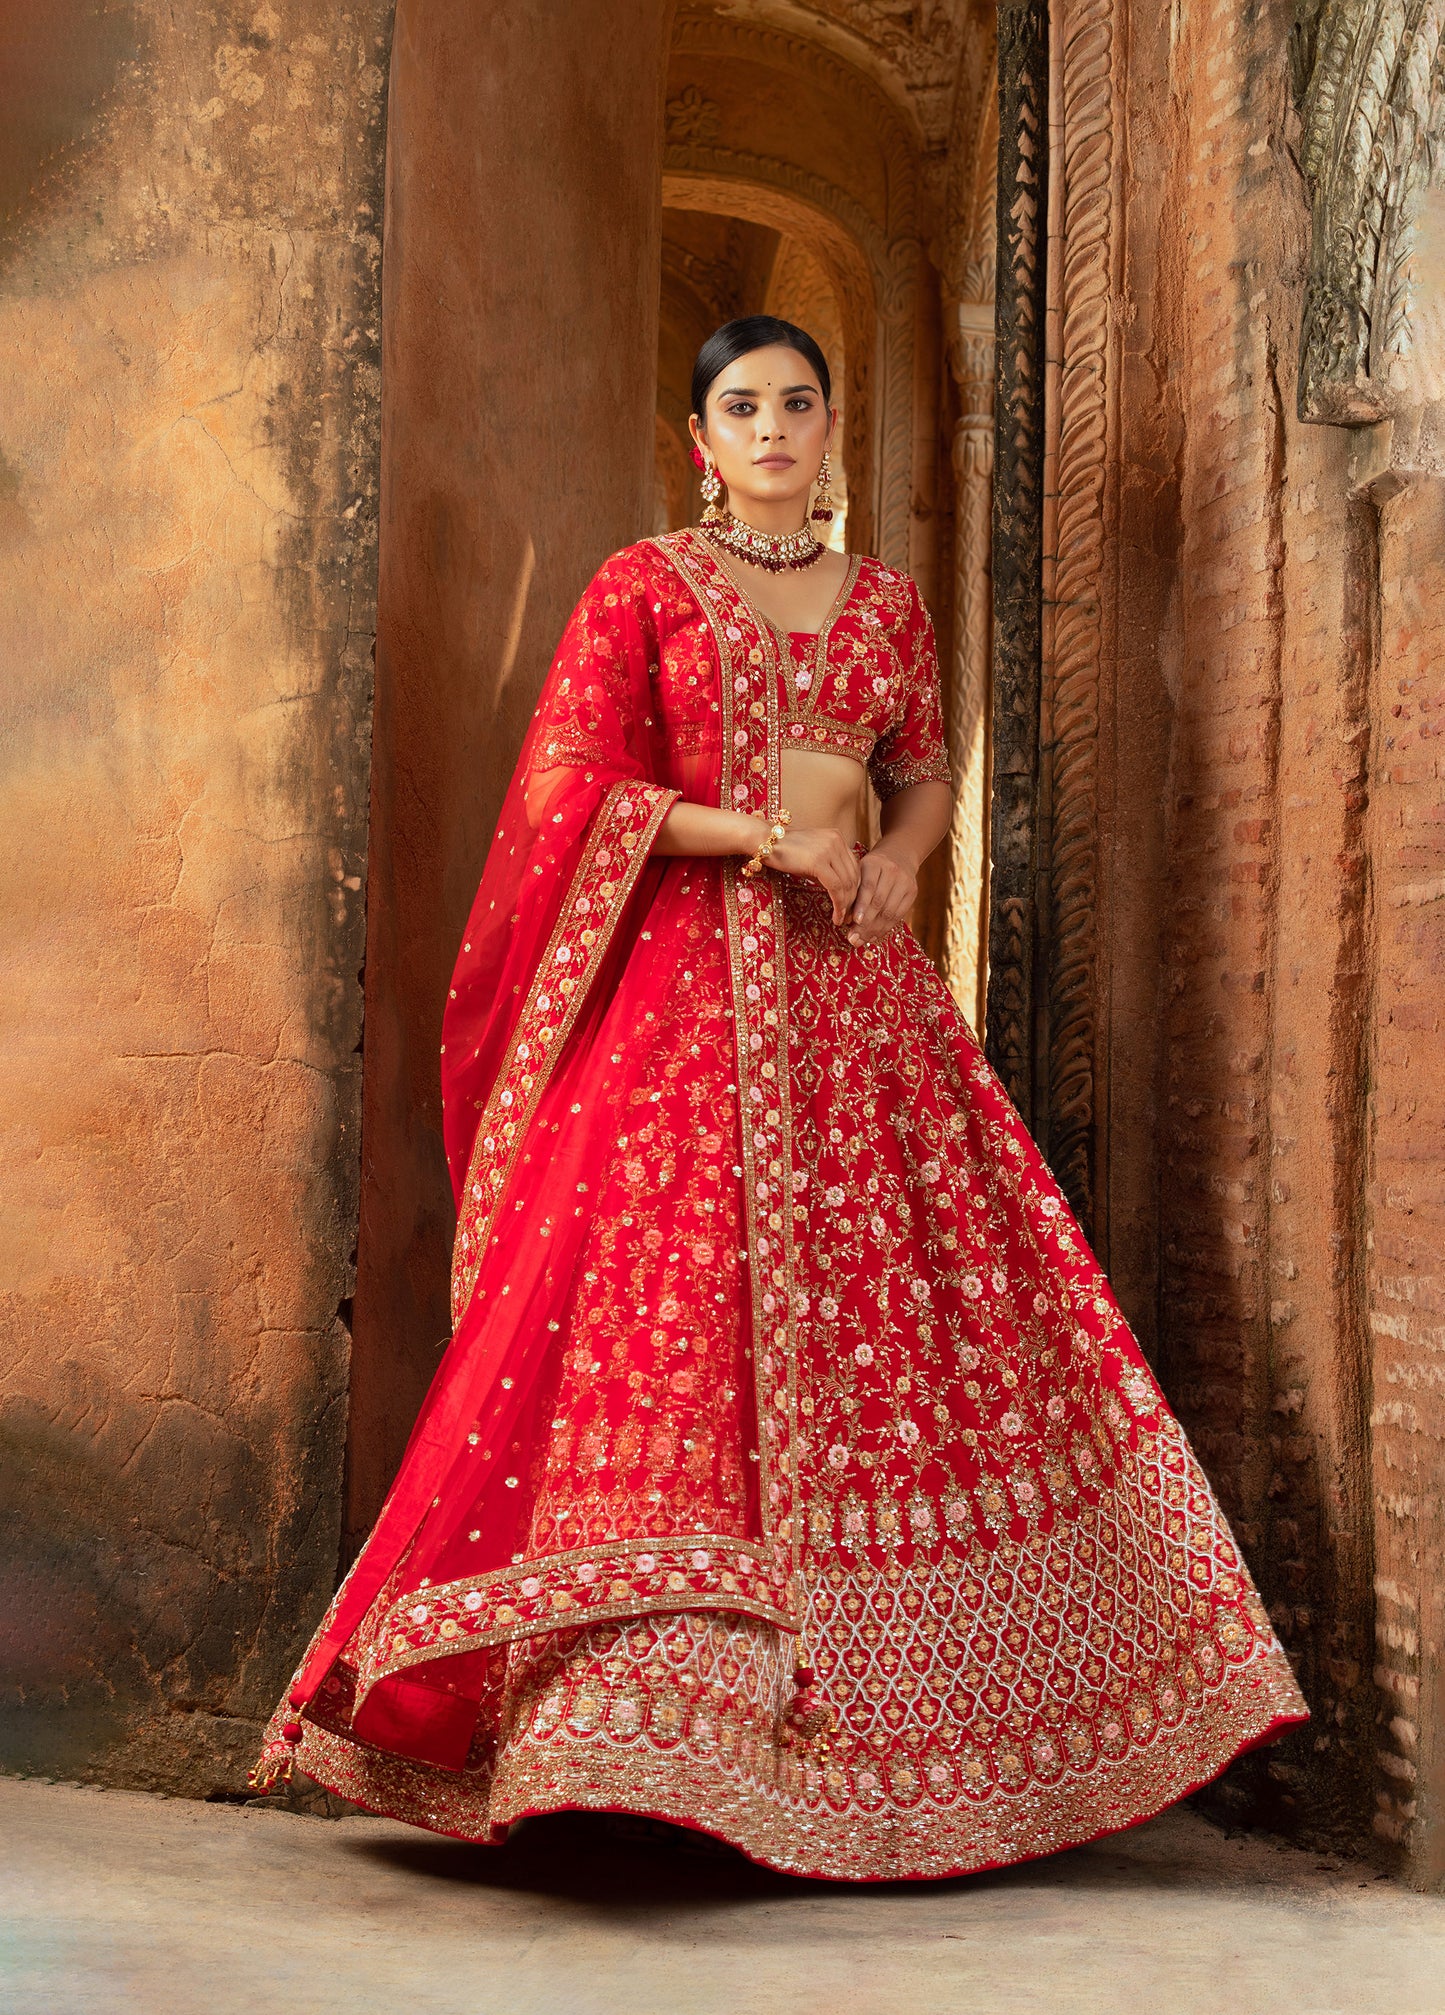 Red Silk Bridal Lehenga for Wedding with Sequins, Cutdana, Hand-Embroidery